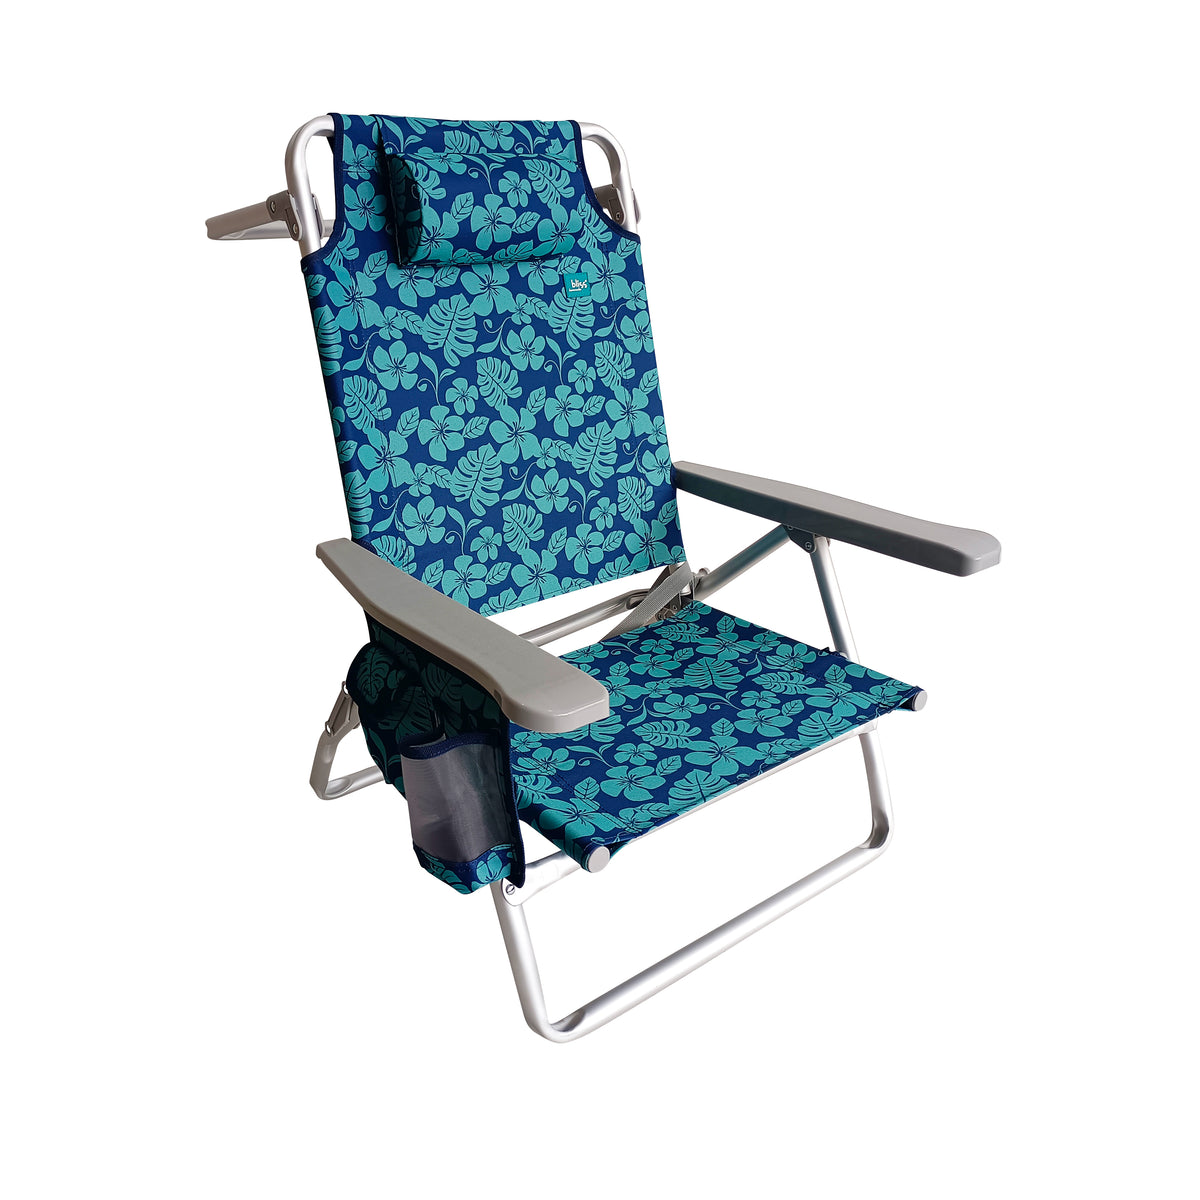 Bliss Hammocks Folding Beach Chair with Towel Rack, cup holder, and side pocket. Blue Flowers variation is a blue color with a light blue flower pattern.